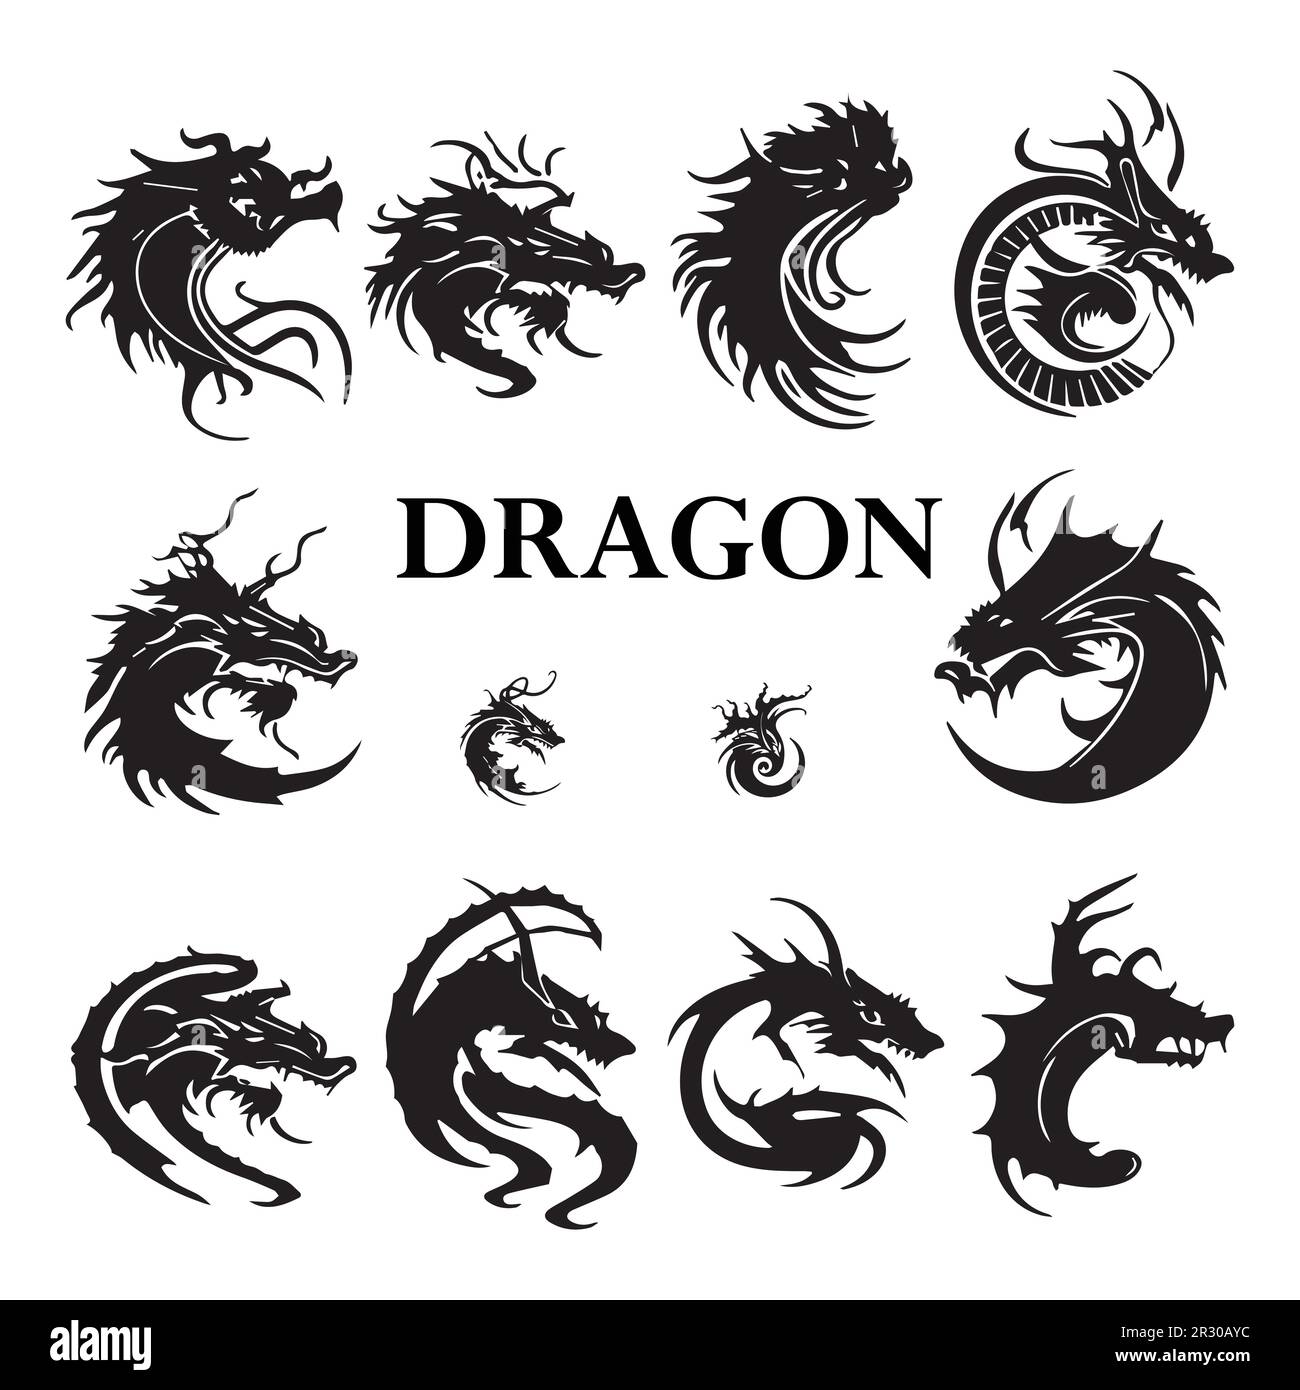 A collection of black dragon vector illustrations. Stock Vector